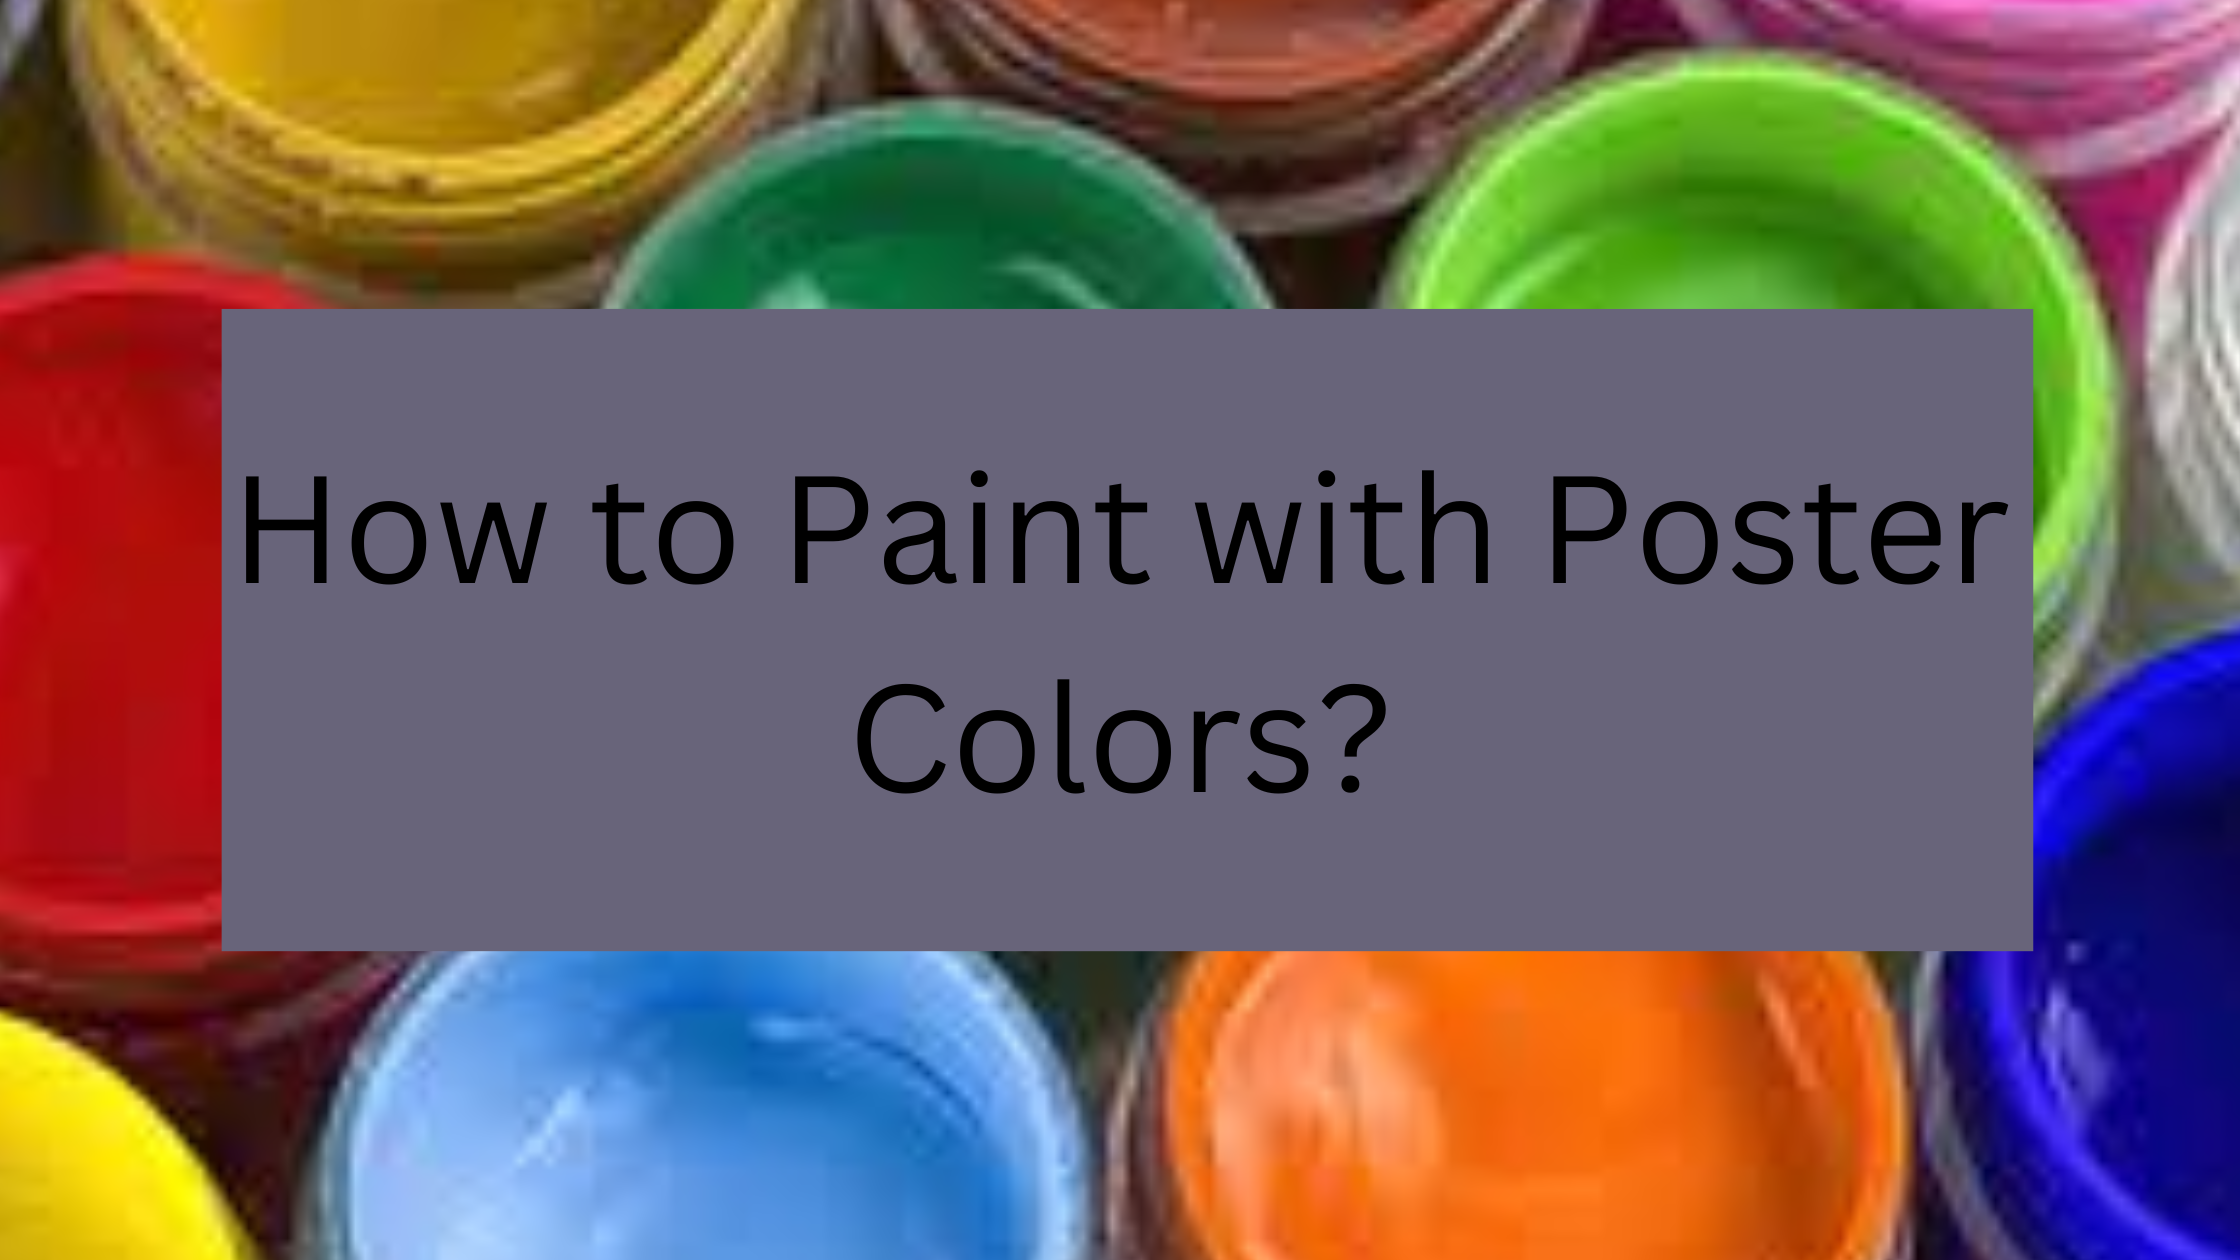 How to Paint with Poster Colors?